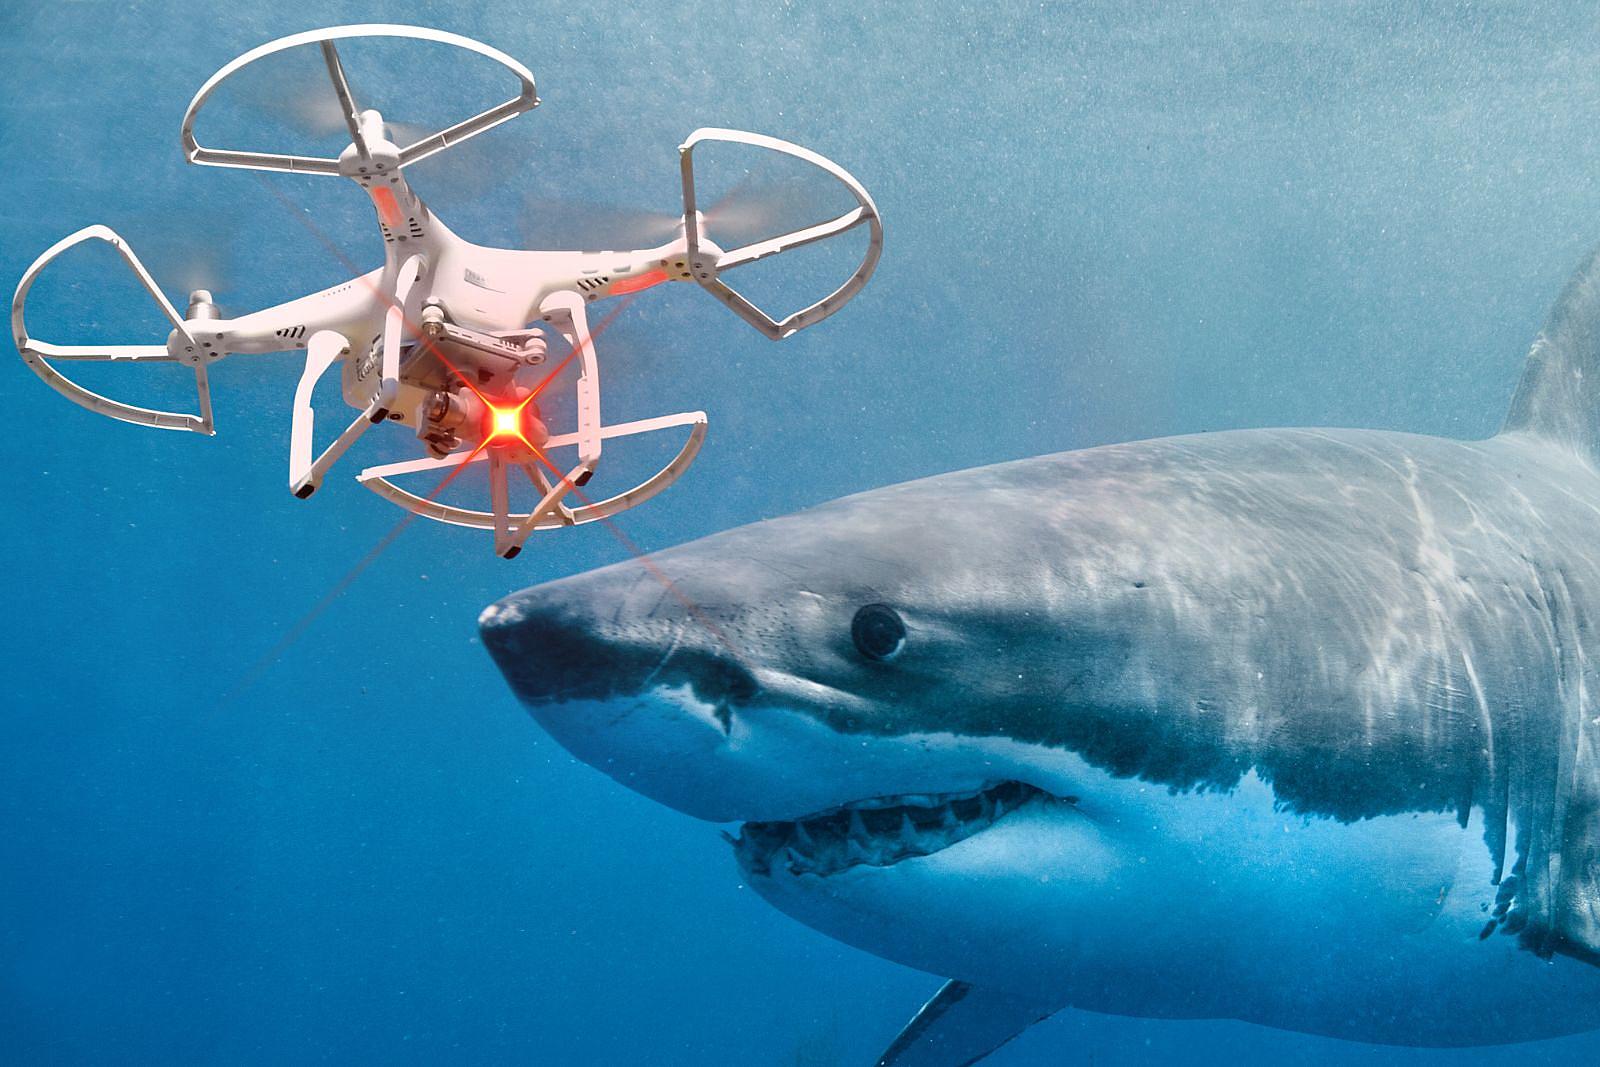 Shark Drones' with Lasers are Coming to New York Beaches